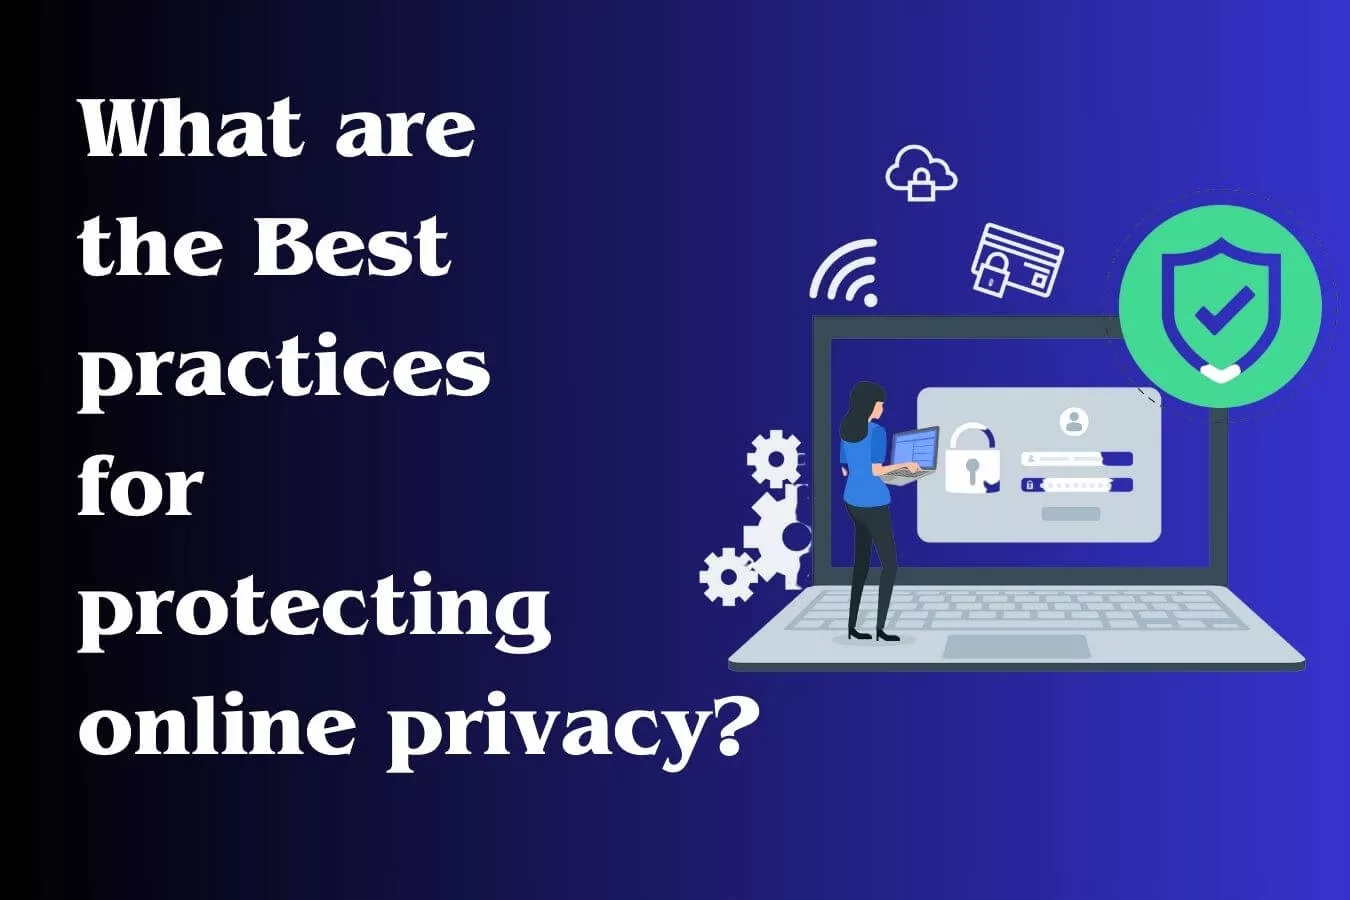 What are the Best practices for protecting online privacy?